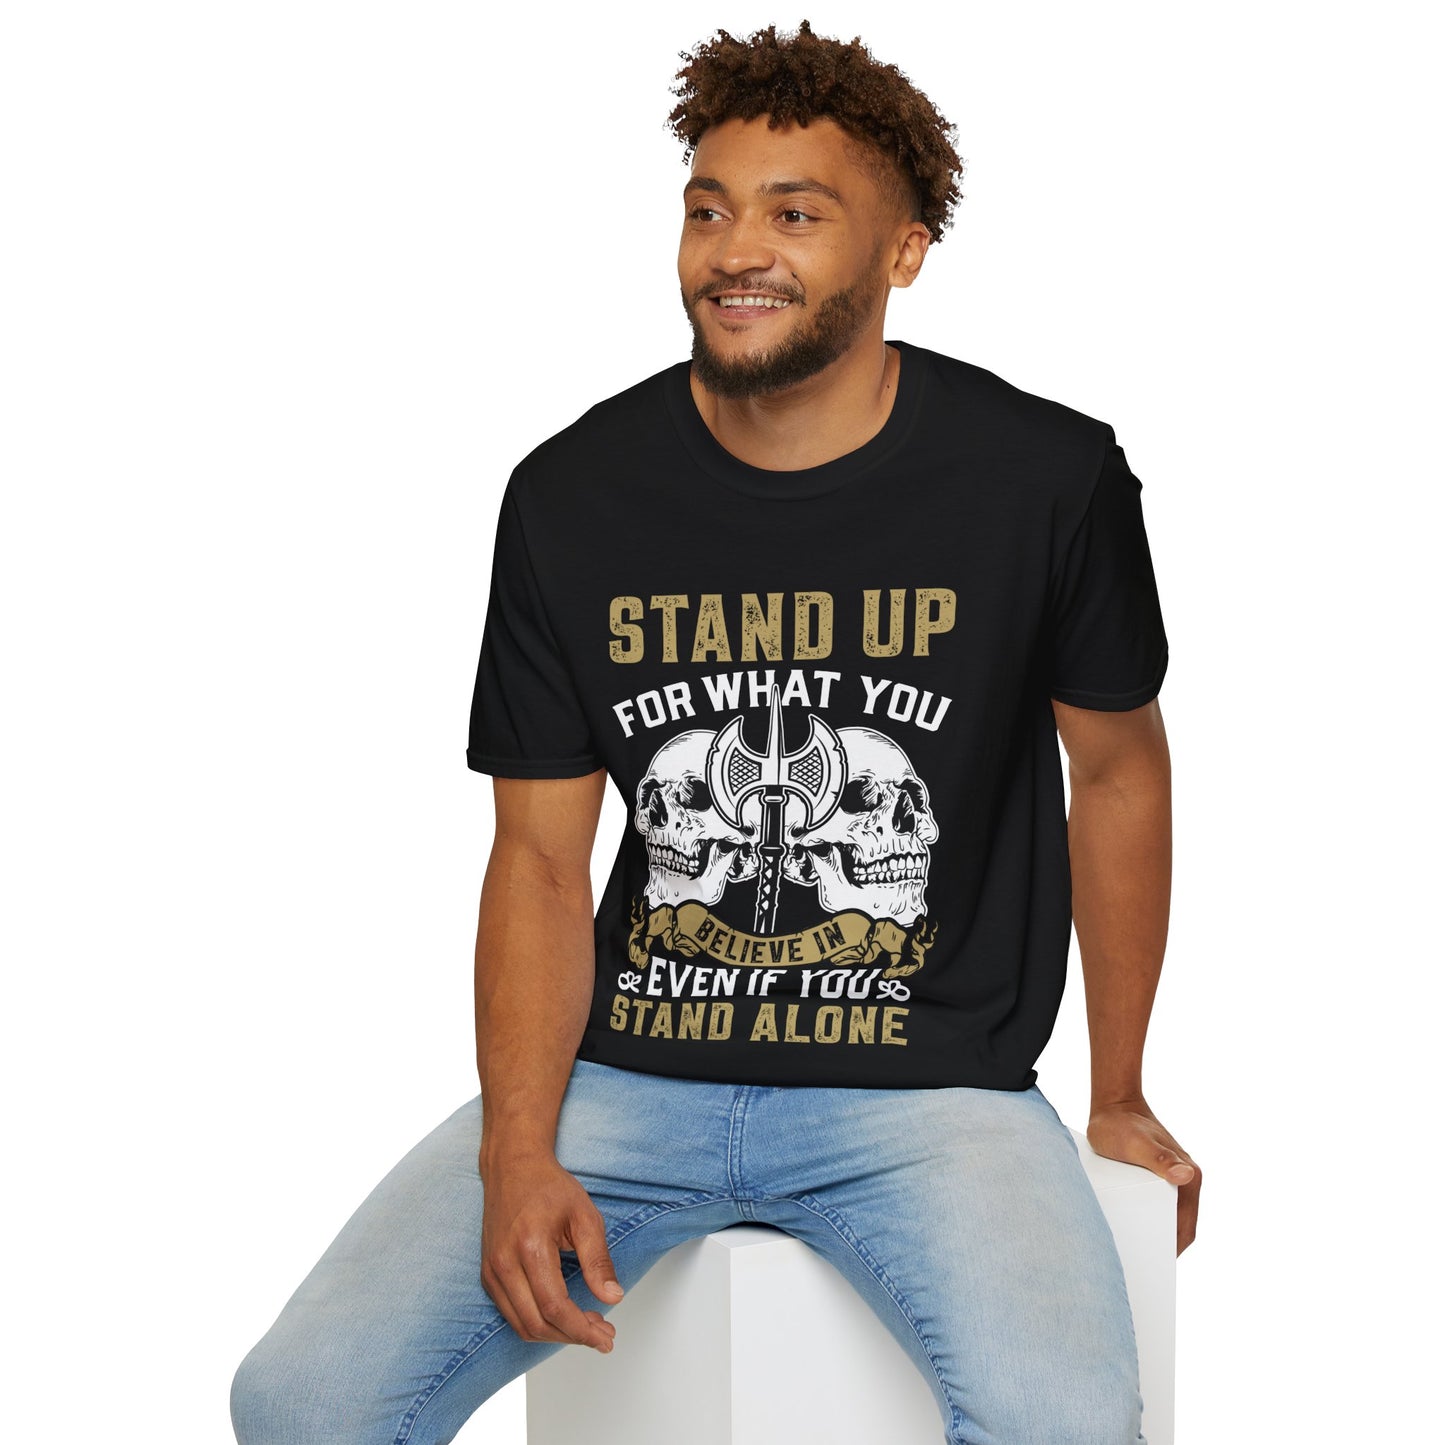 Stand Up For What You Believe In Even If You Stand Alone Viking T-Shirt